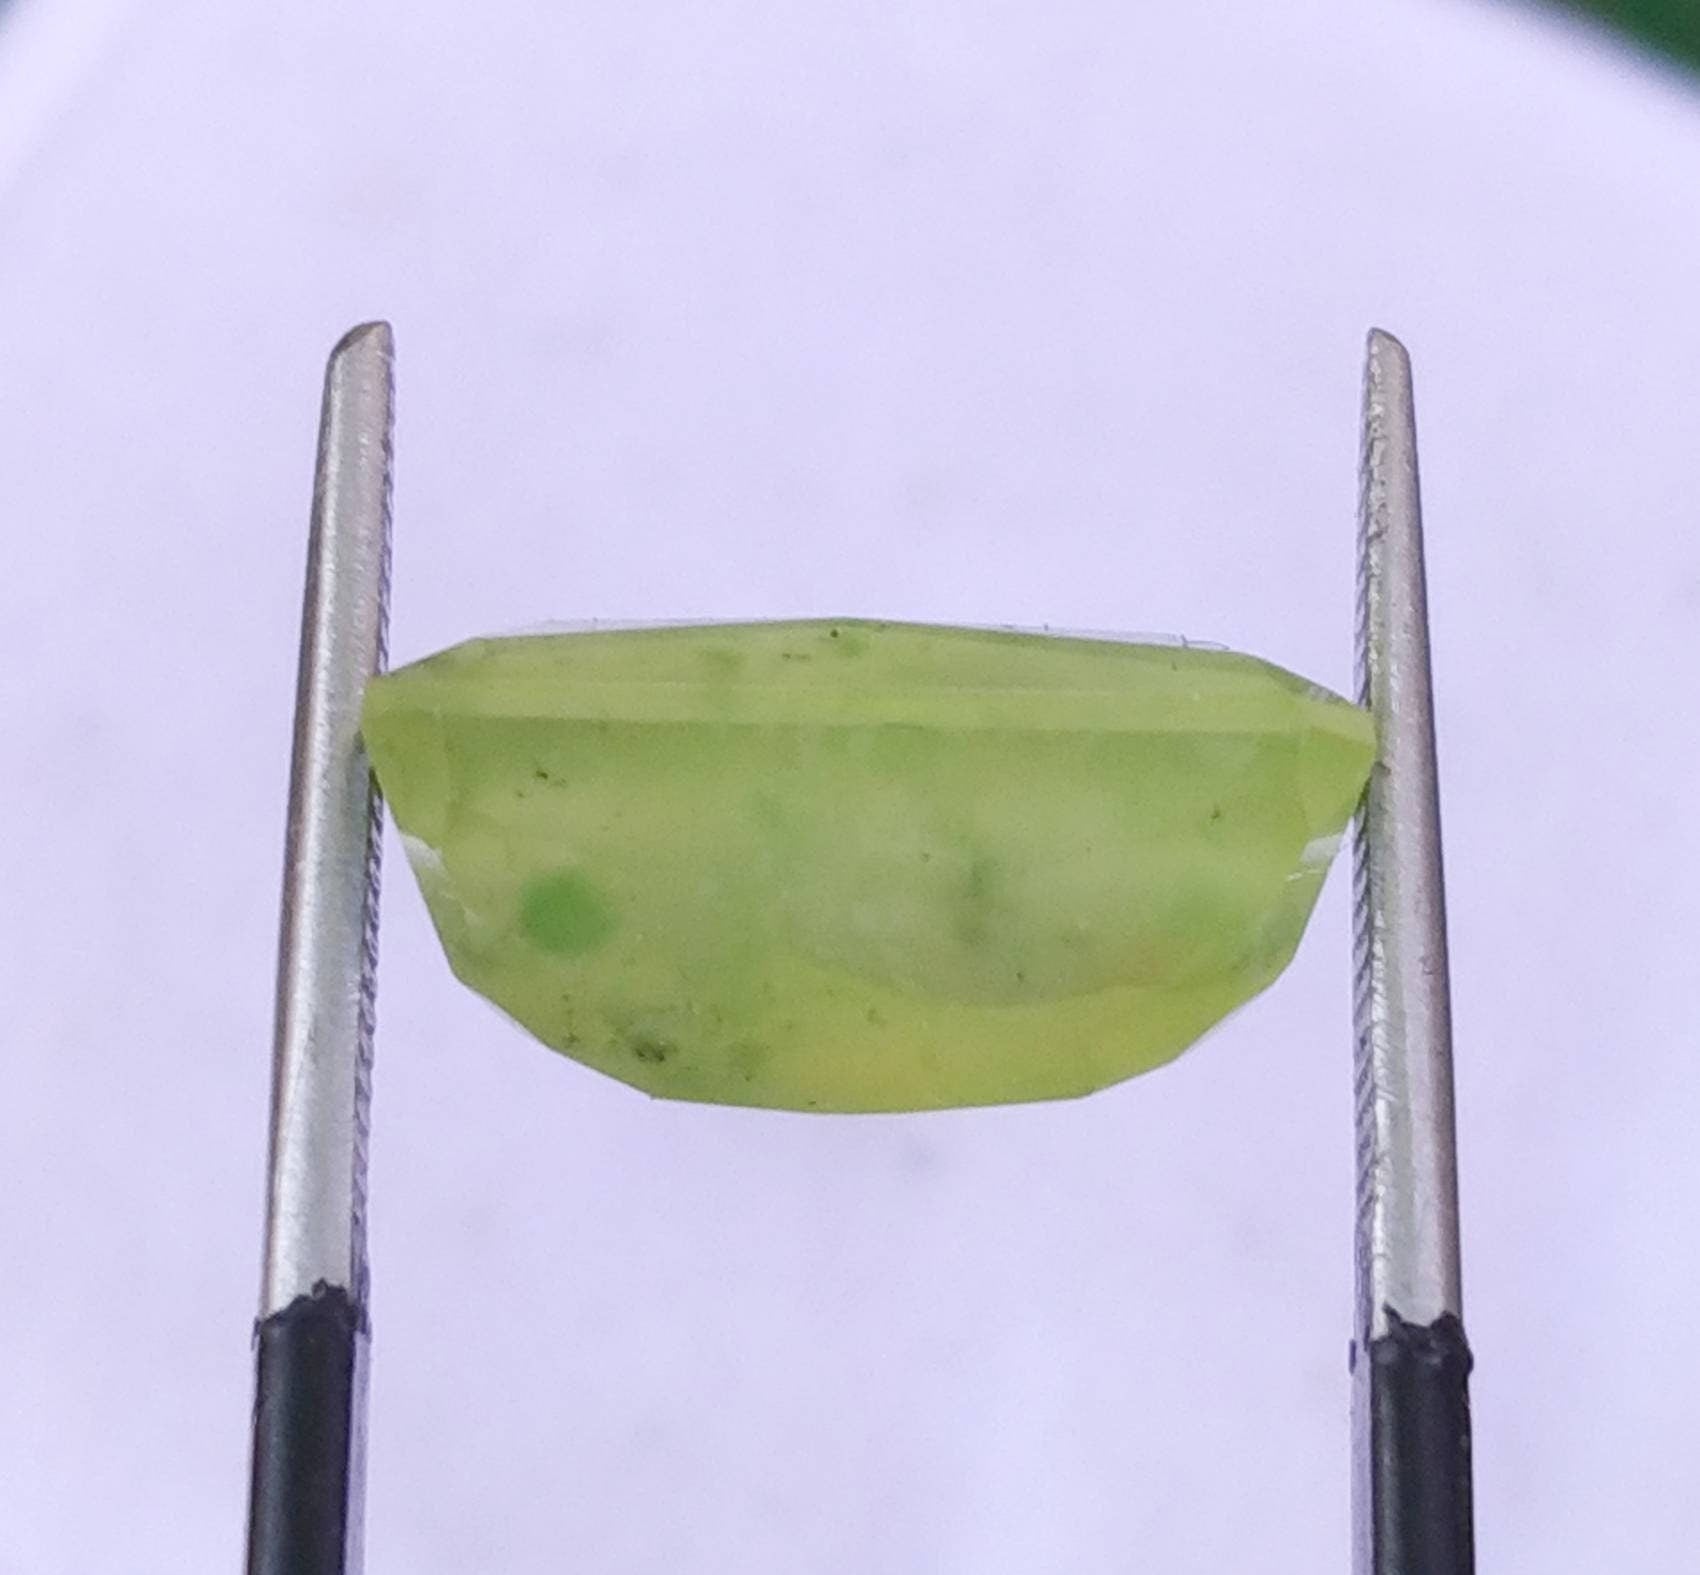 ARSAA GEMS AND MINERALSNatural top quality beautiful 7.5 carats oval shape faceted green hydrograssular garnet gem - Premium  from ARSAA GEMS AND MINERALS - Just $20.00! Shop now at ARSAA GEMS AND MINERALS